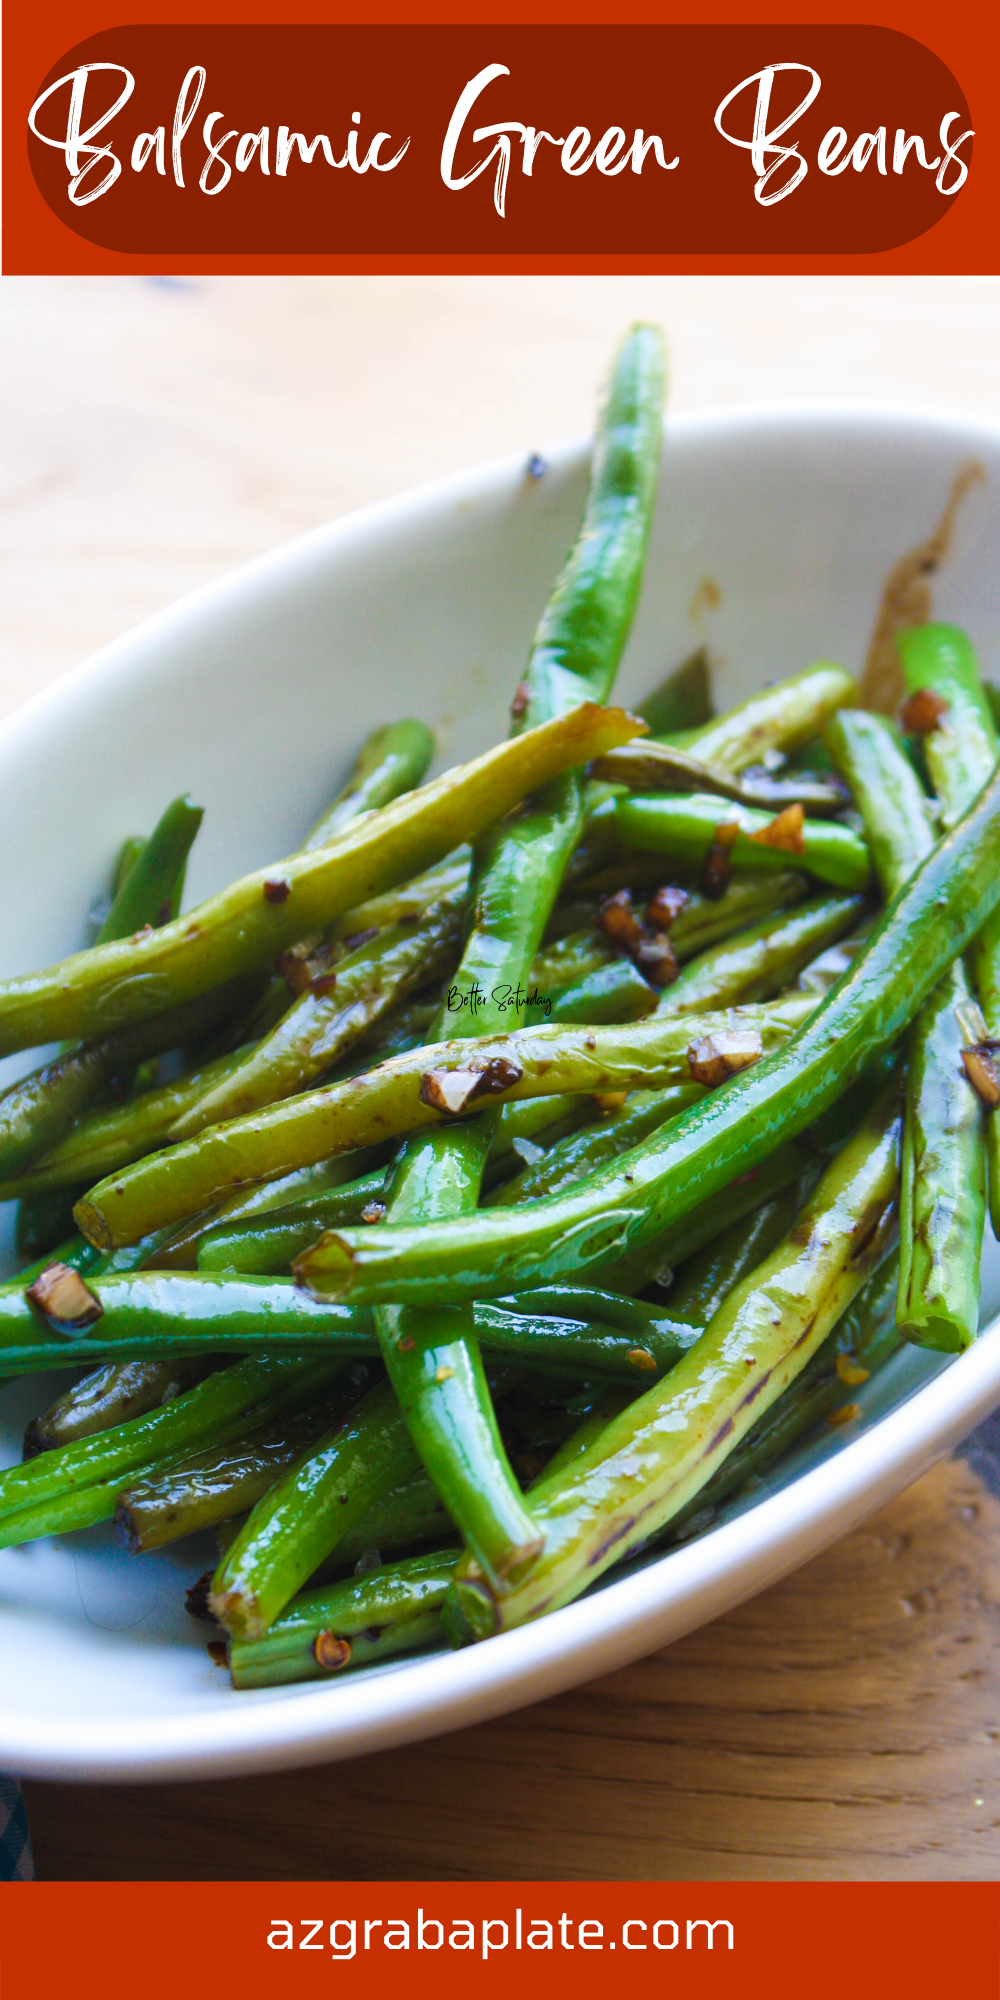 Balsamic green beans are delightful as a side dish.